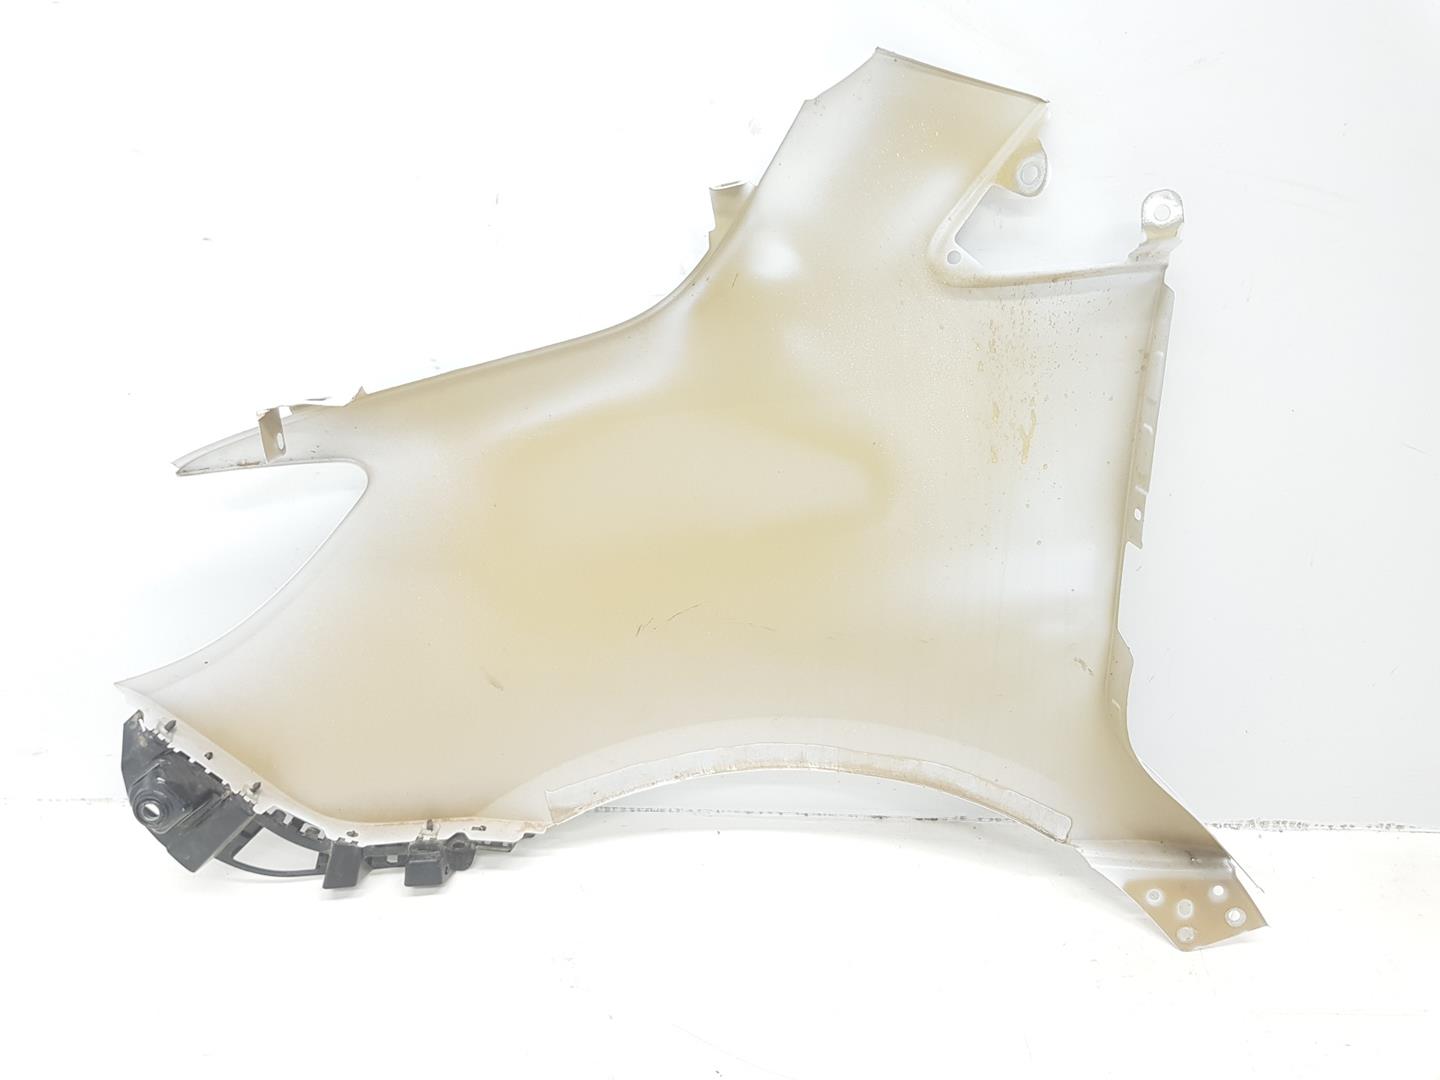 MERCEDES-BENZ Sprinter 1 generation (903) (1995-2006) Front Right Fender A9108810100, A9108810100, COLORBLANCO9147 19868168